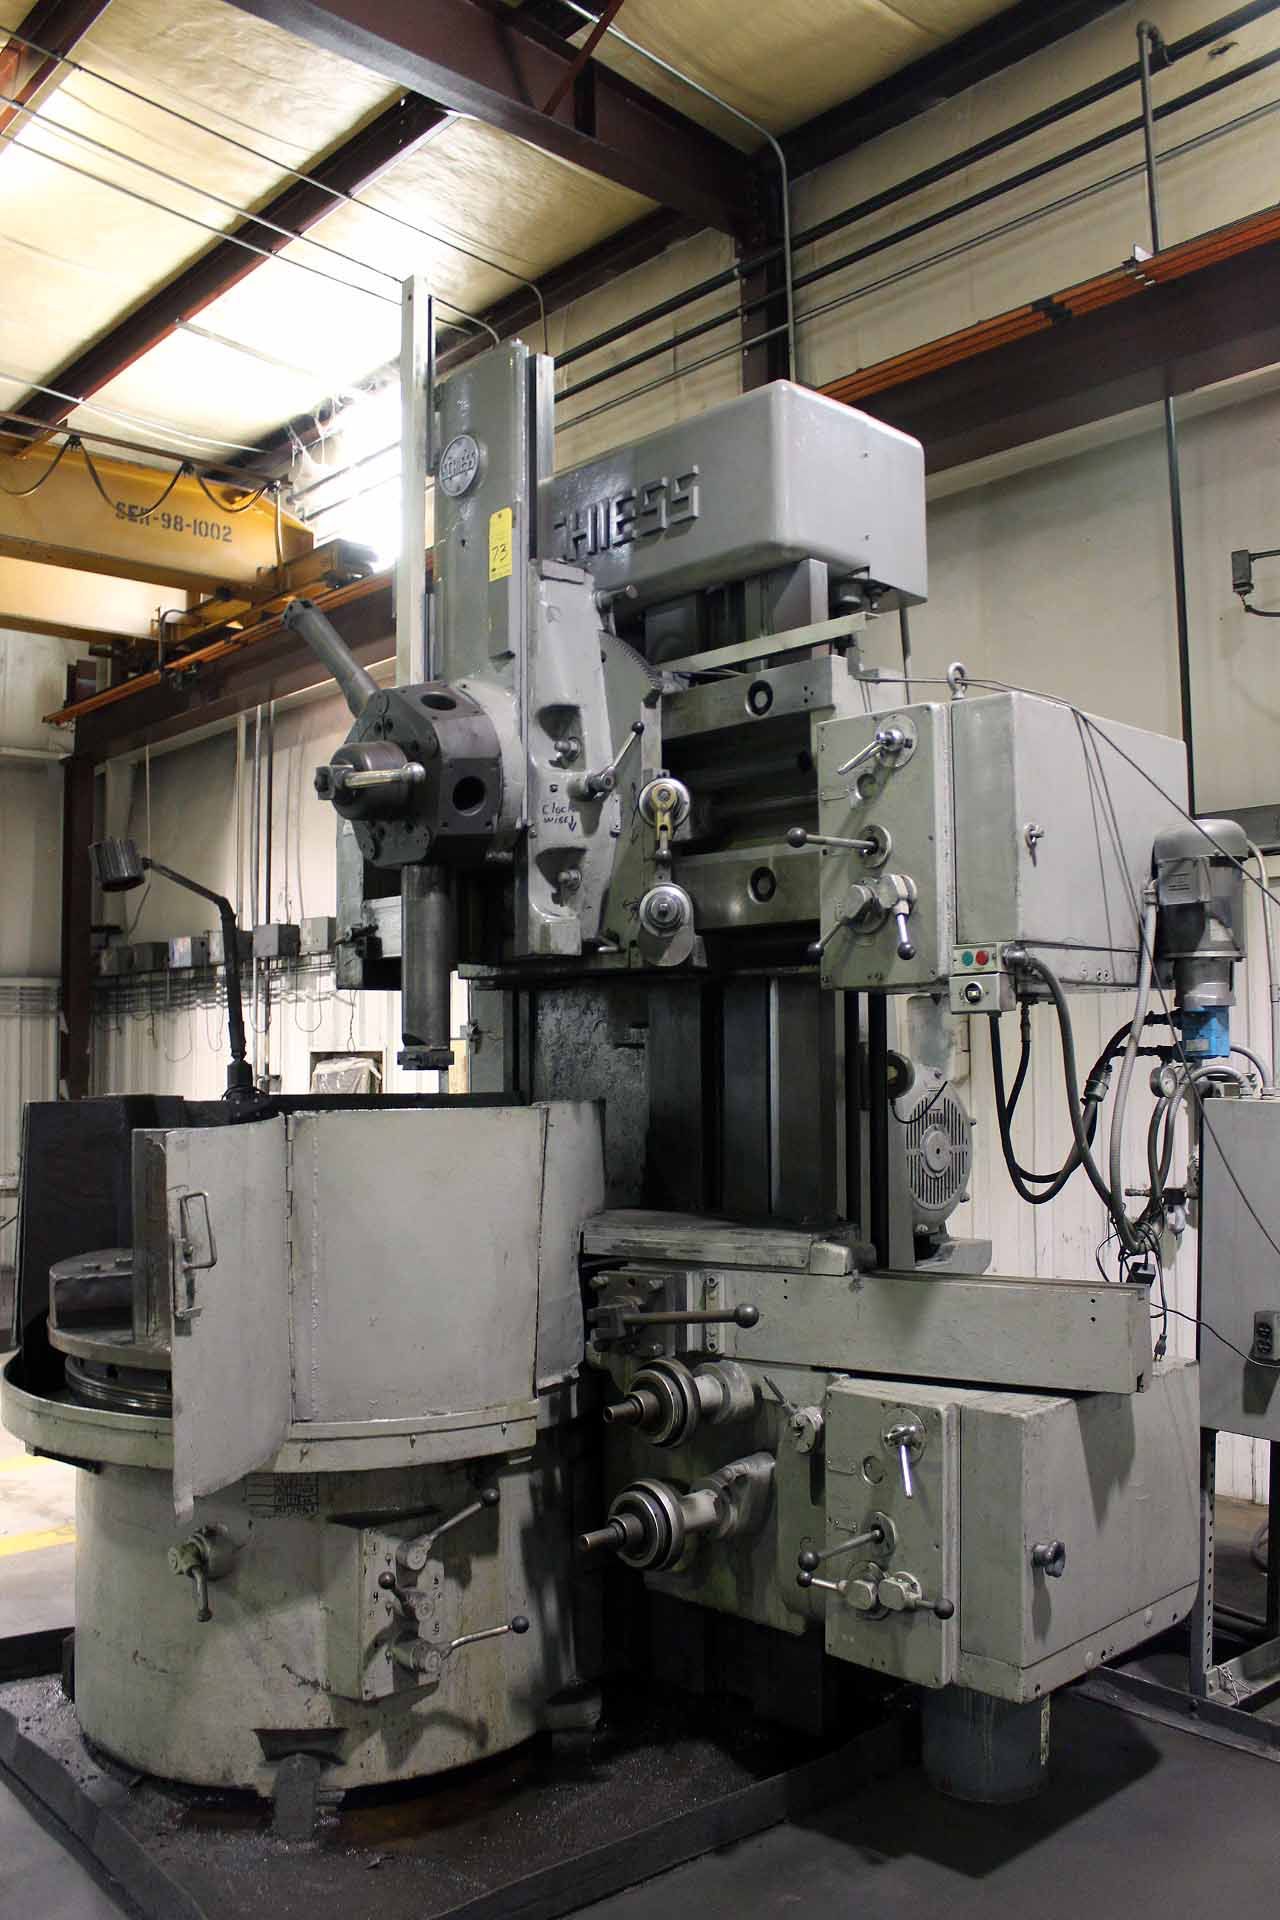 VERTICAL TURRET LATHE, SCHIESS MDL. 13ED-125, 49.2” table, 55.1” swing, 43.3” turning height, 9, - Image 6 of 6